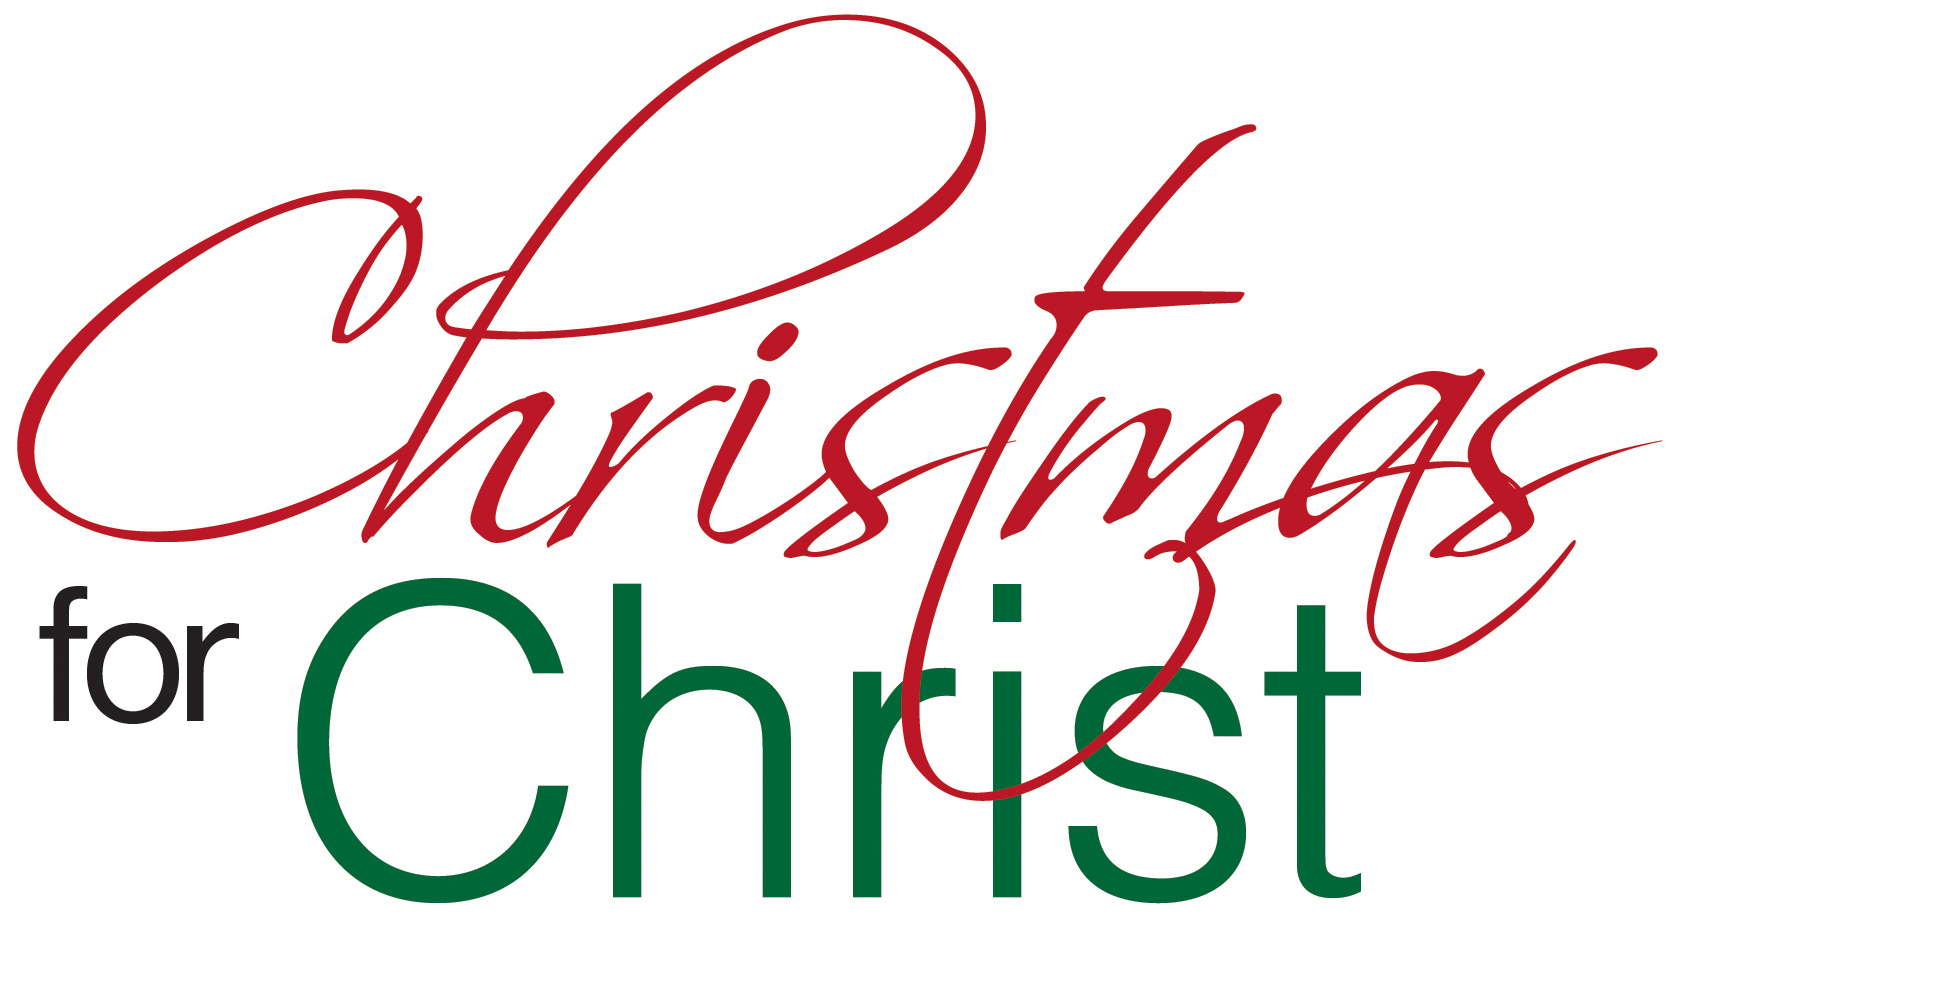 christian christmas clipart free download - photo #43